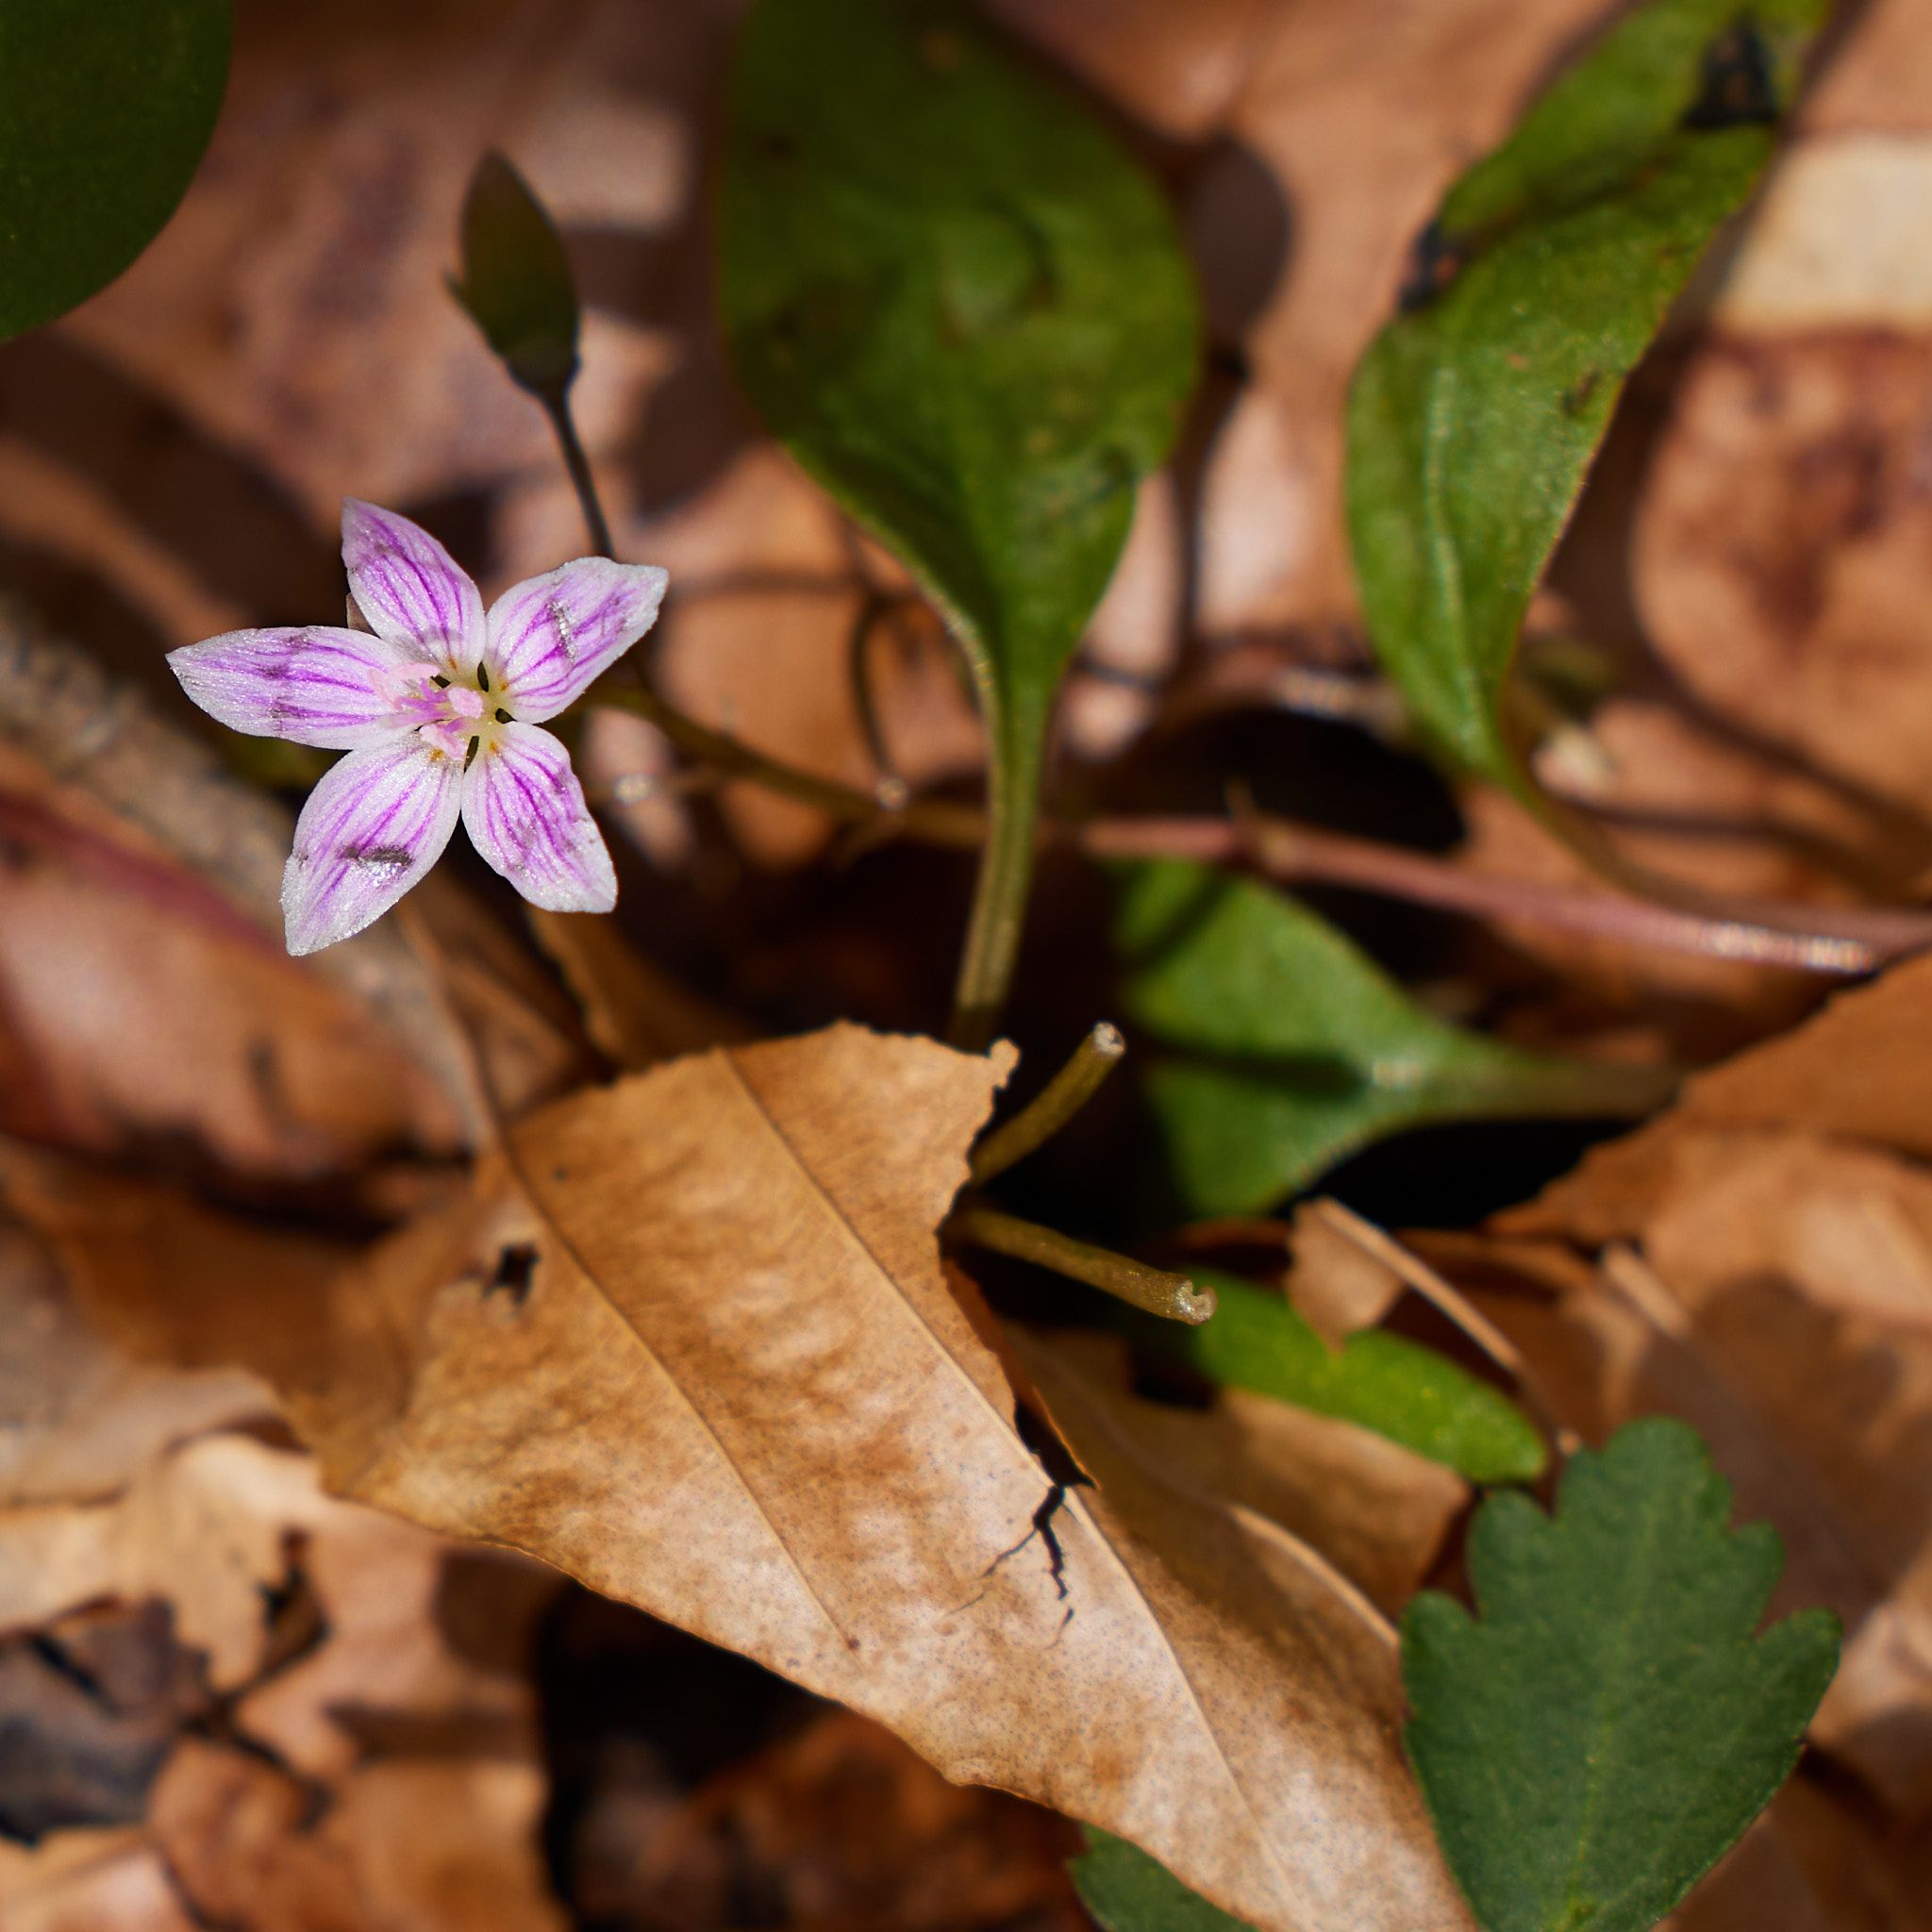 A white flower with pink lines adds a splash of color to the brown and green leaves surrounding it.